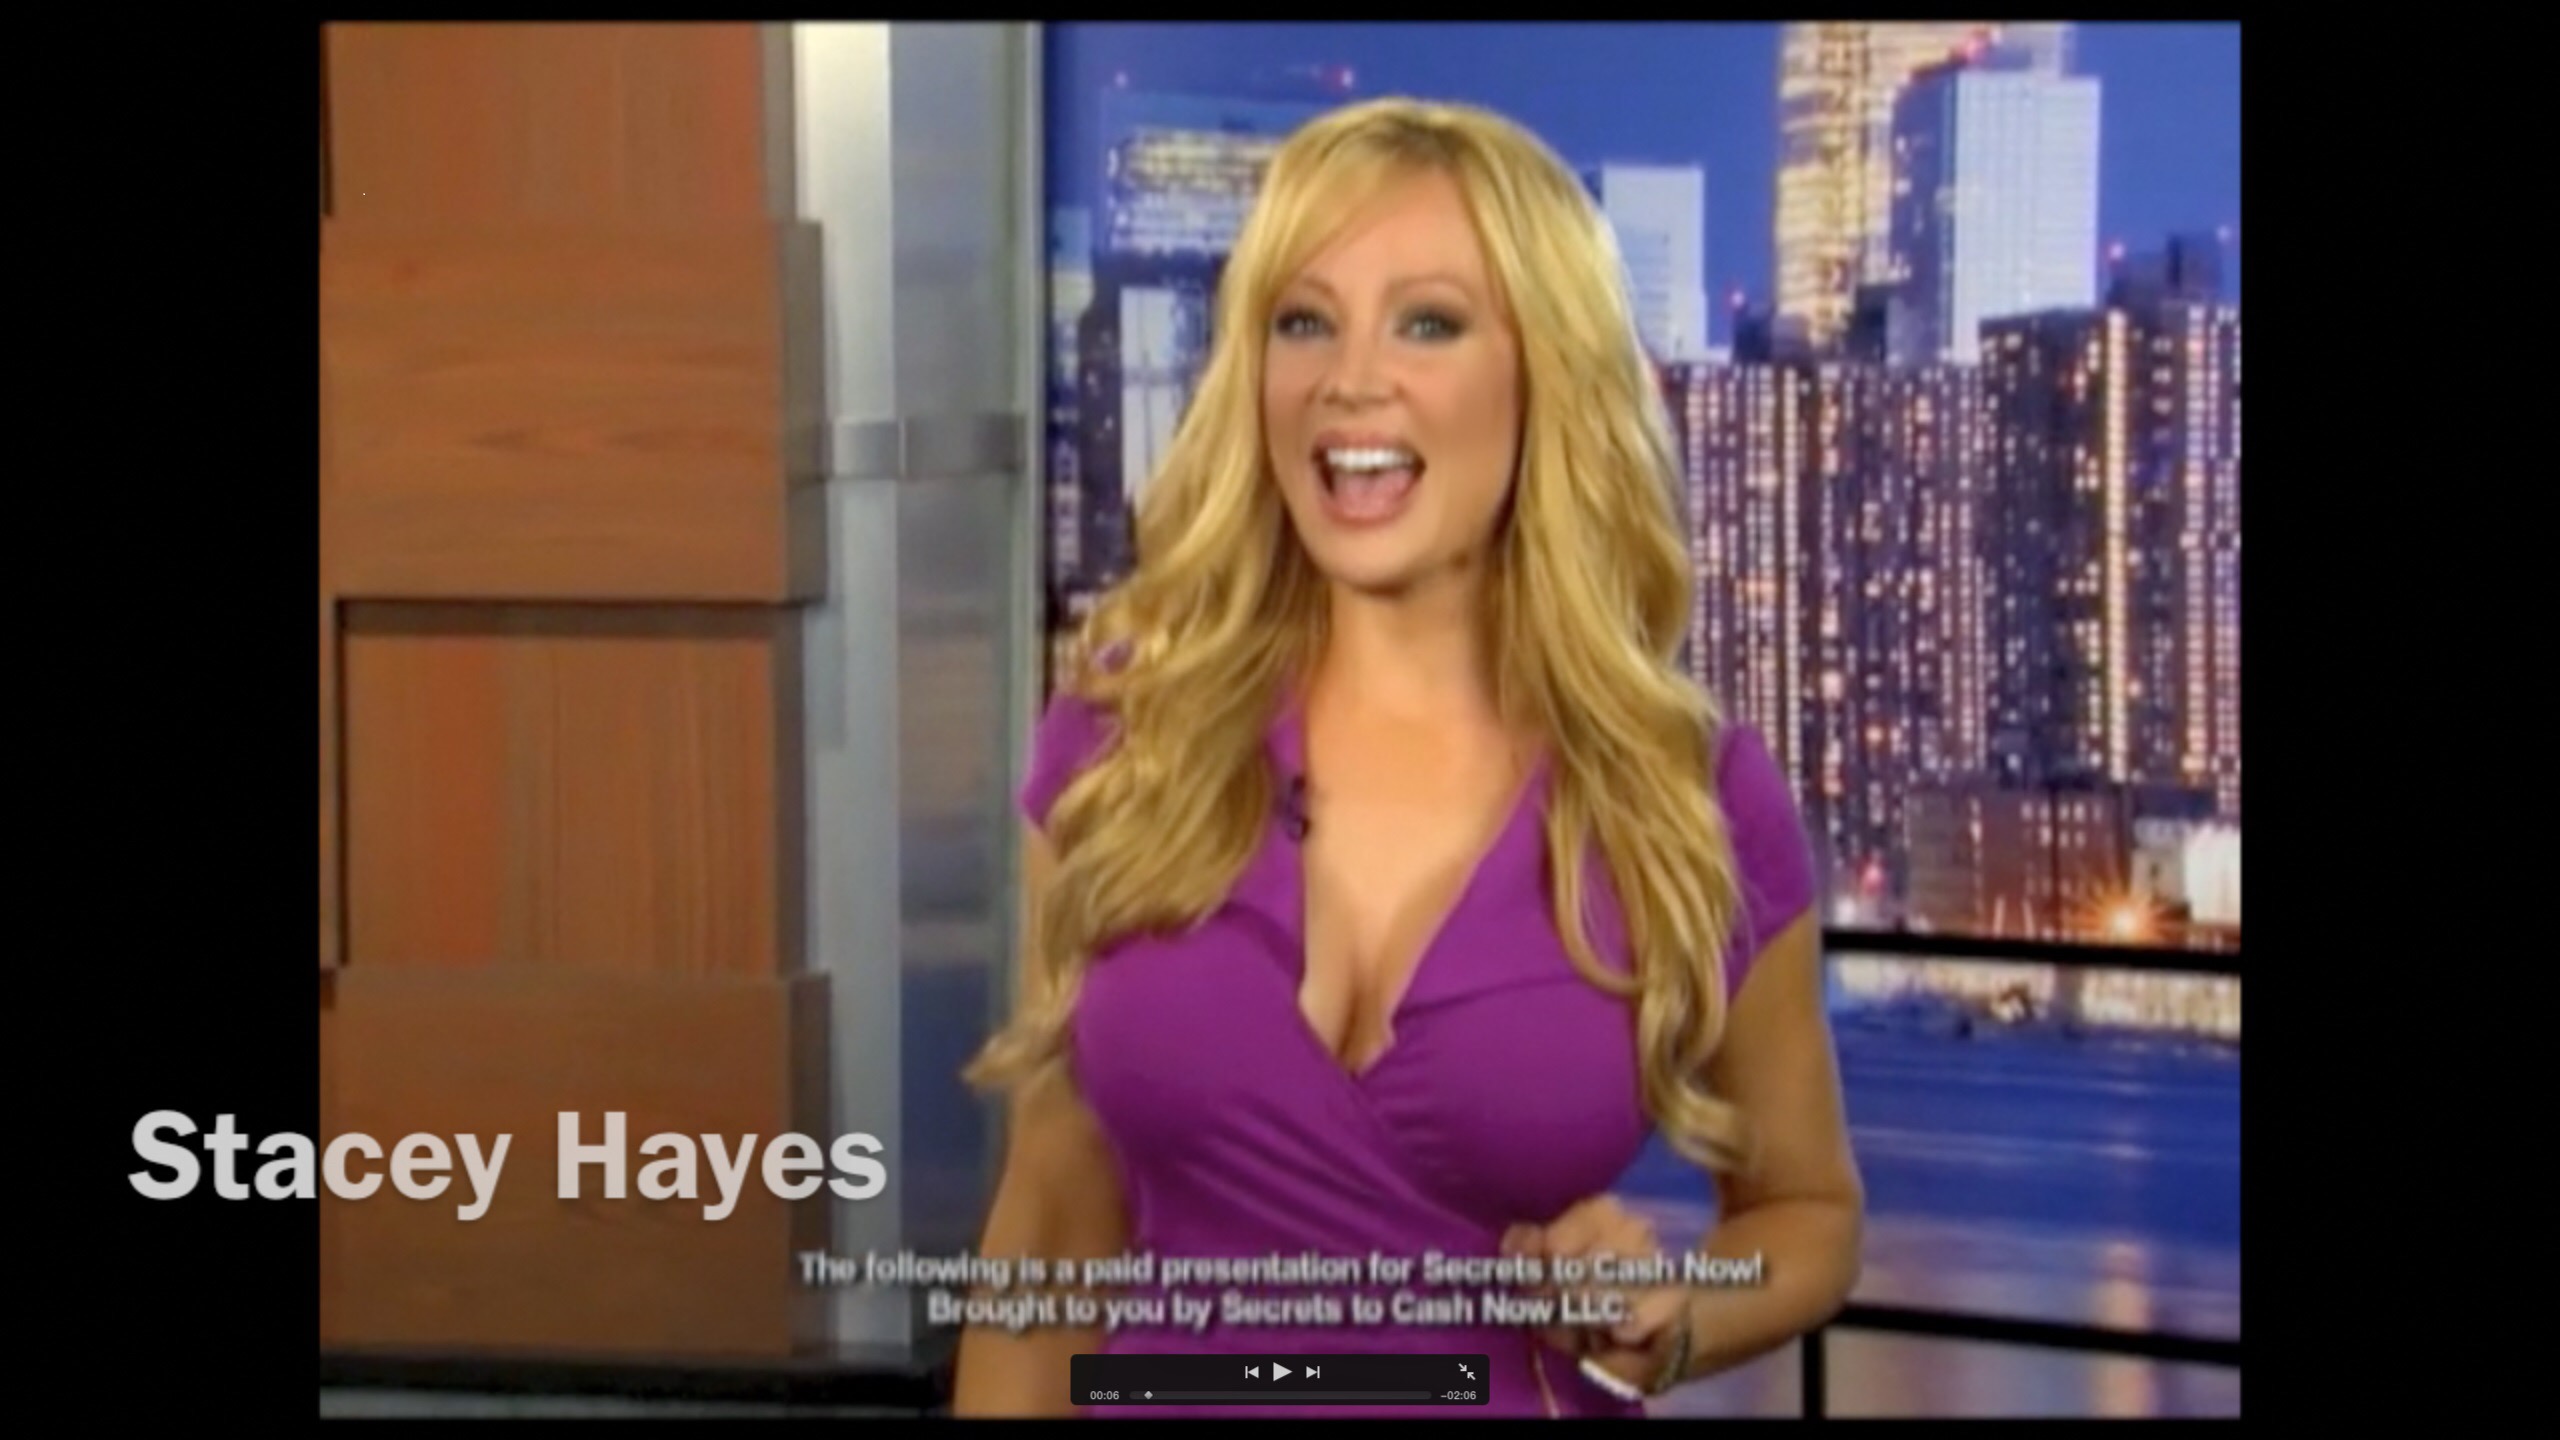 Screen grab of Host Stacey Hayes from SECRETS TO CASH NOW Infomercial